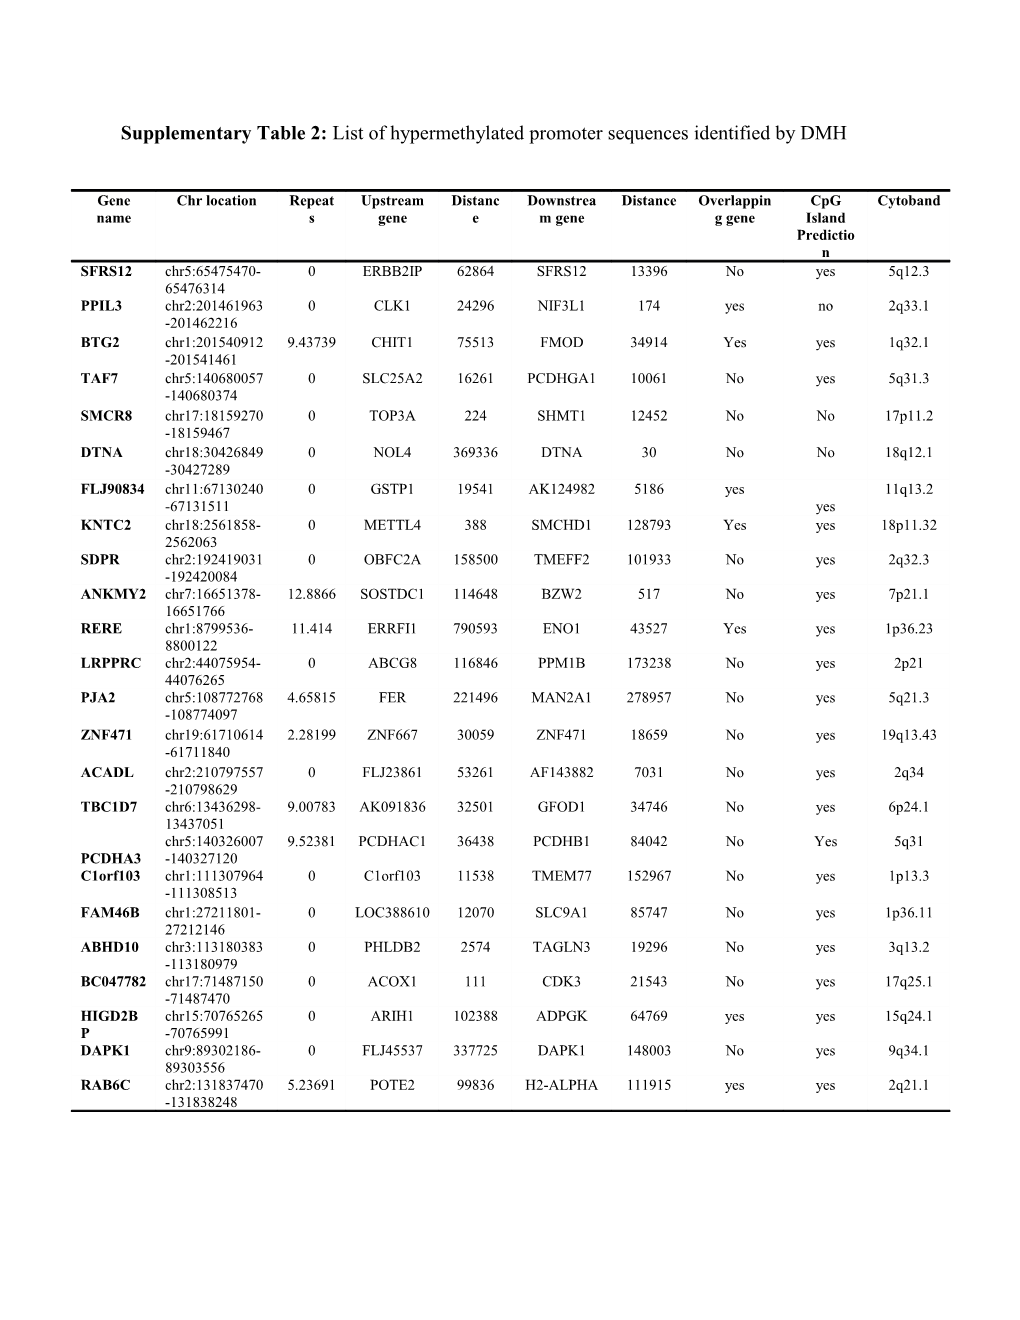 Supplementary Table 2: List of Hypermethylated Promoter Sequences Identified by DMH